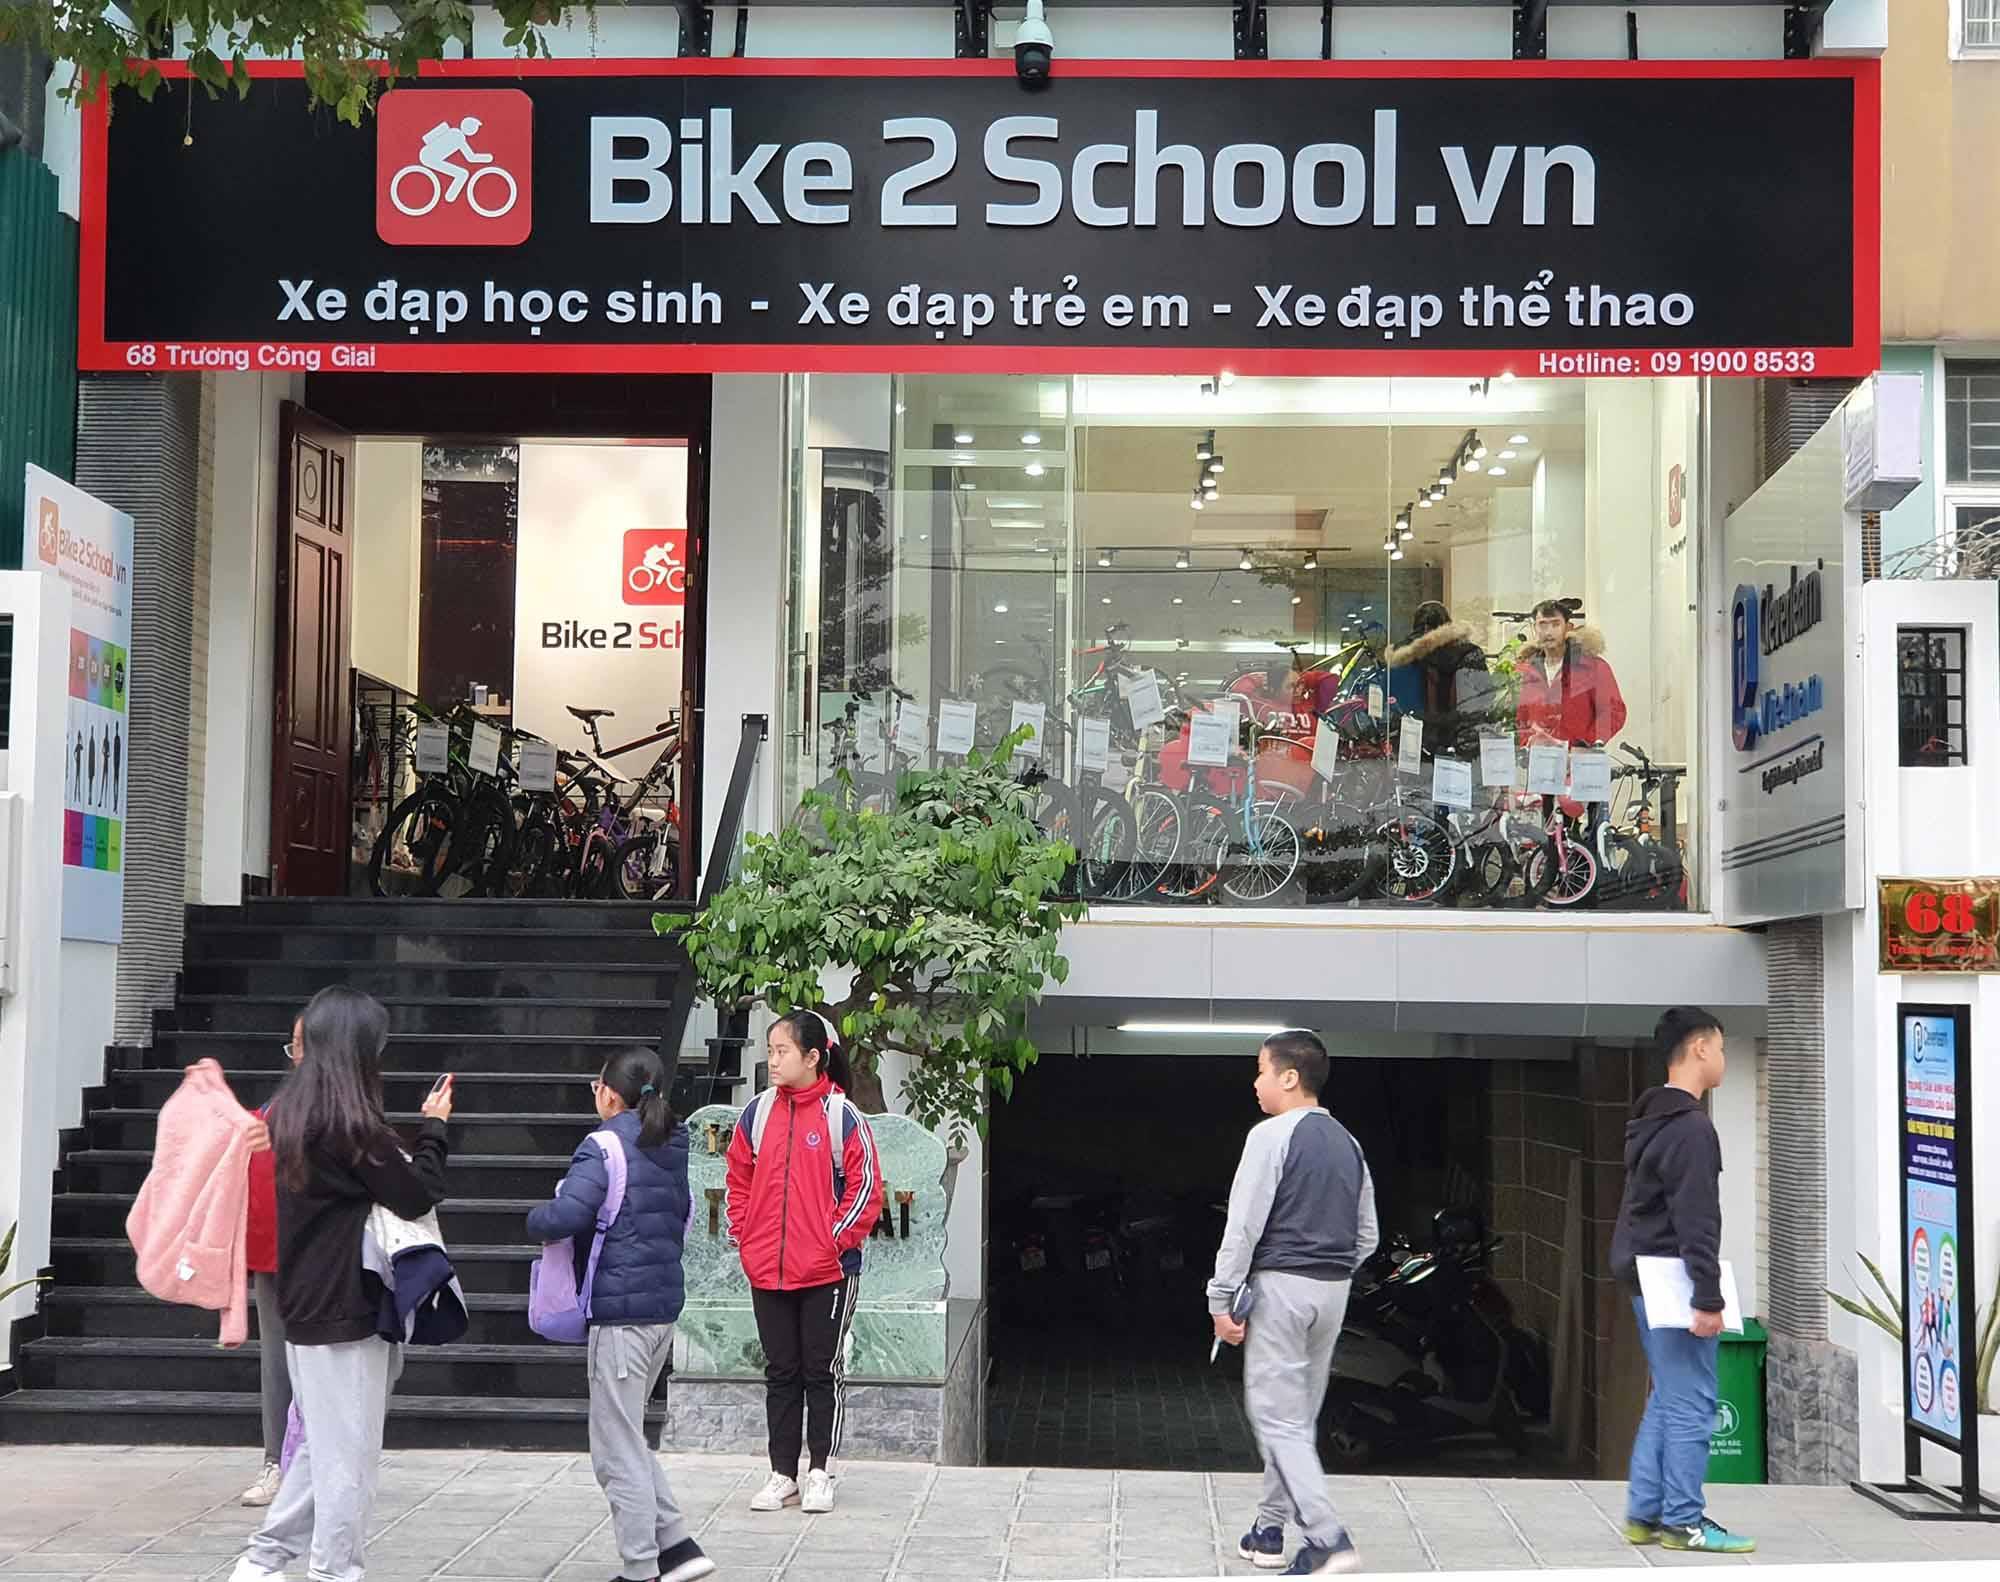 A group of people walking outside a bike shop

Description automatically generated with low confidence